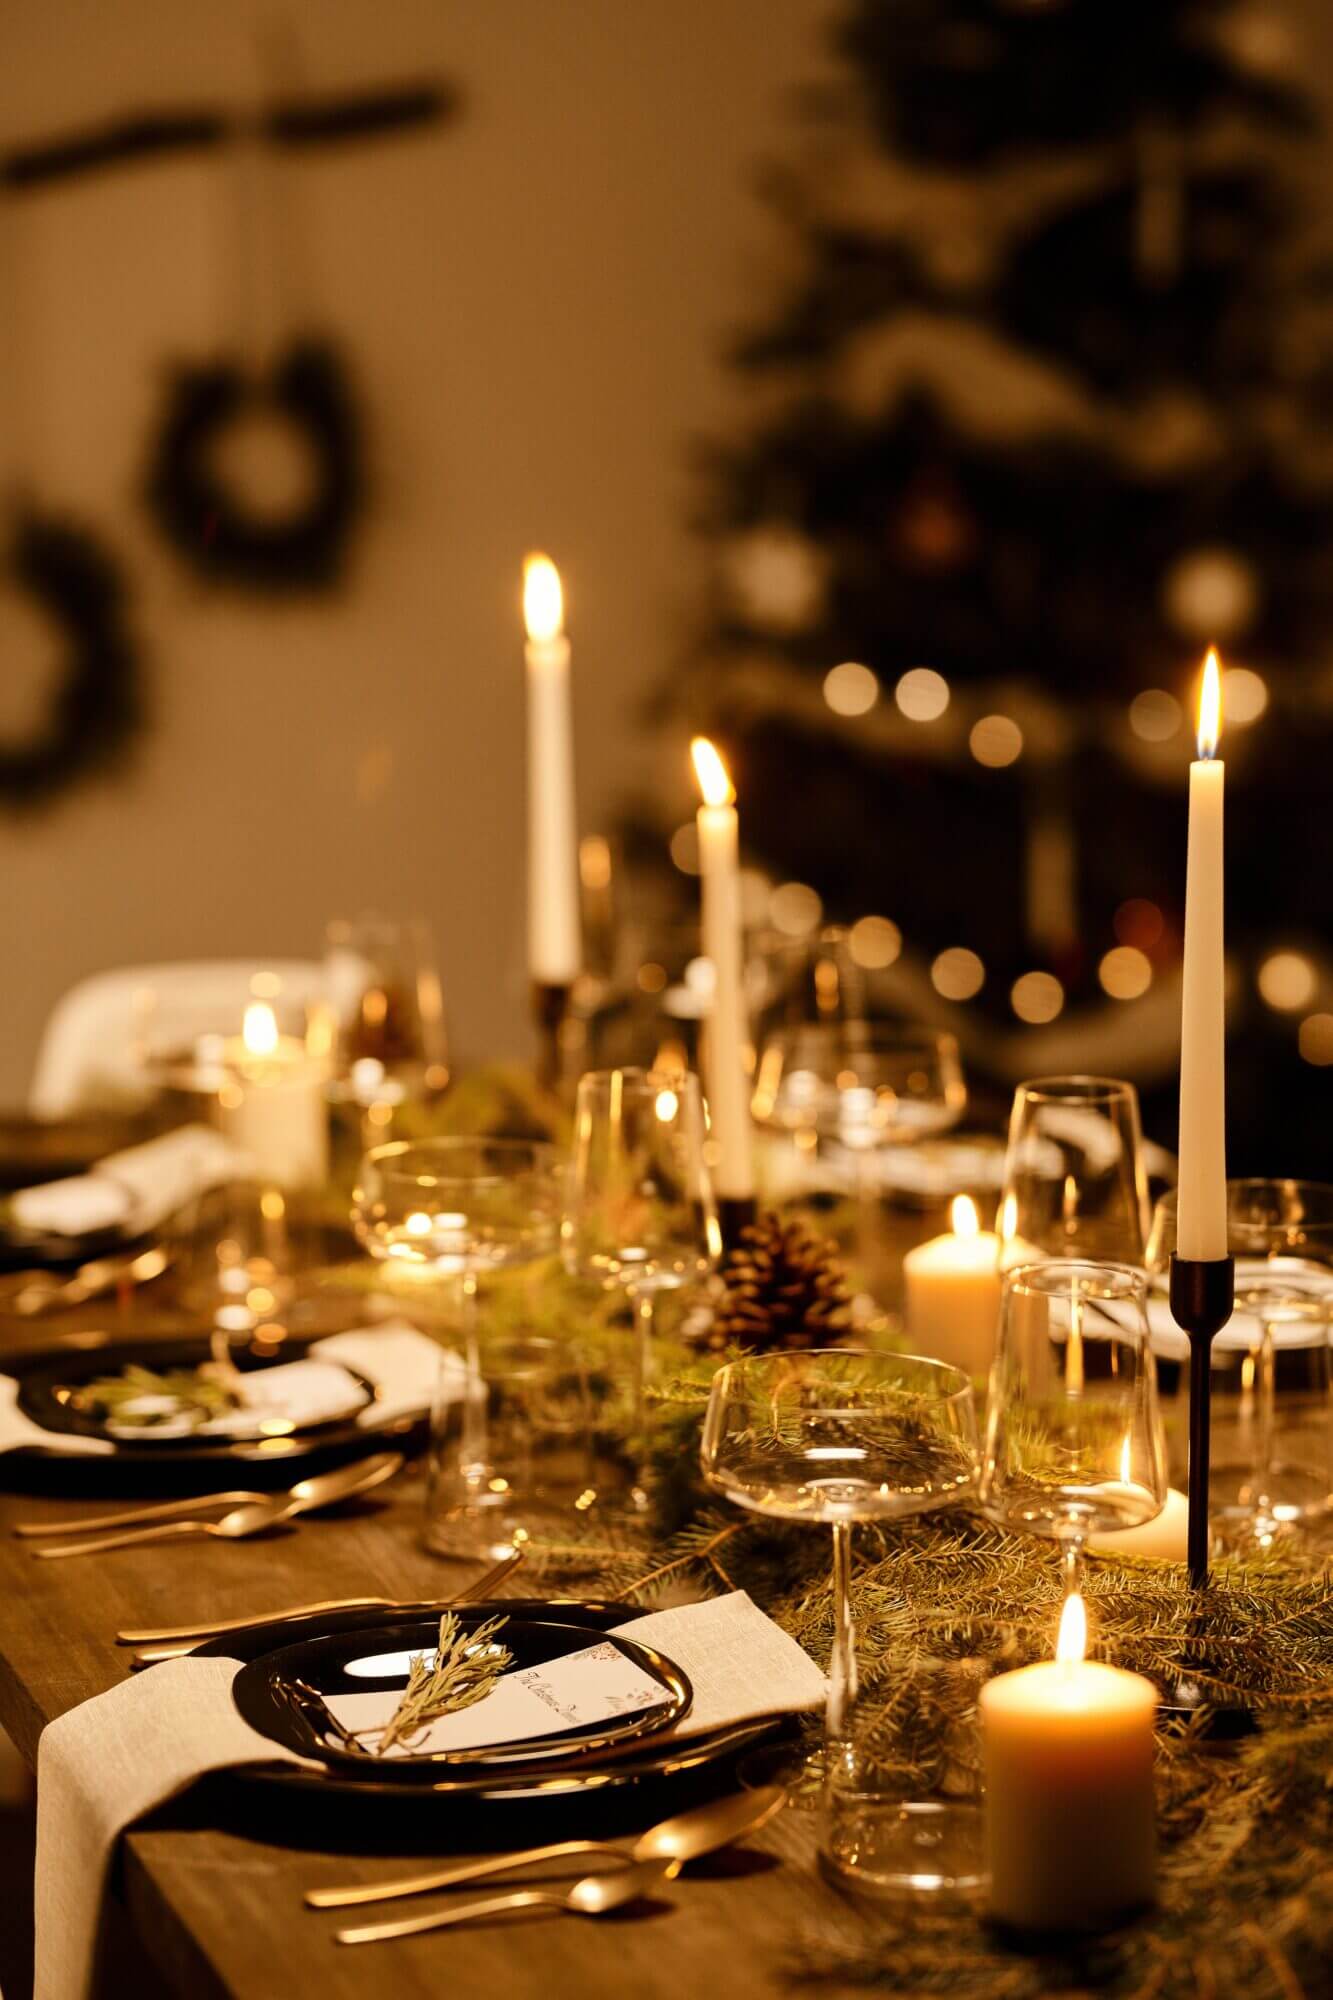 A christmas table setting with candles and place settings.